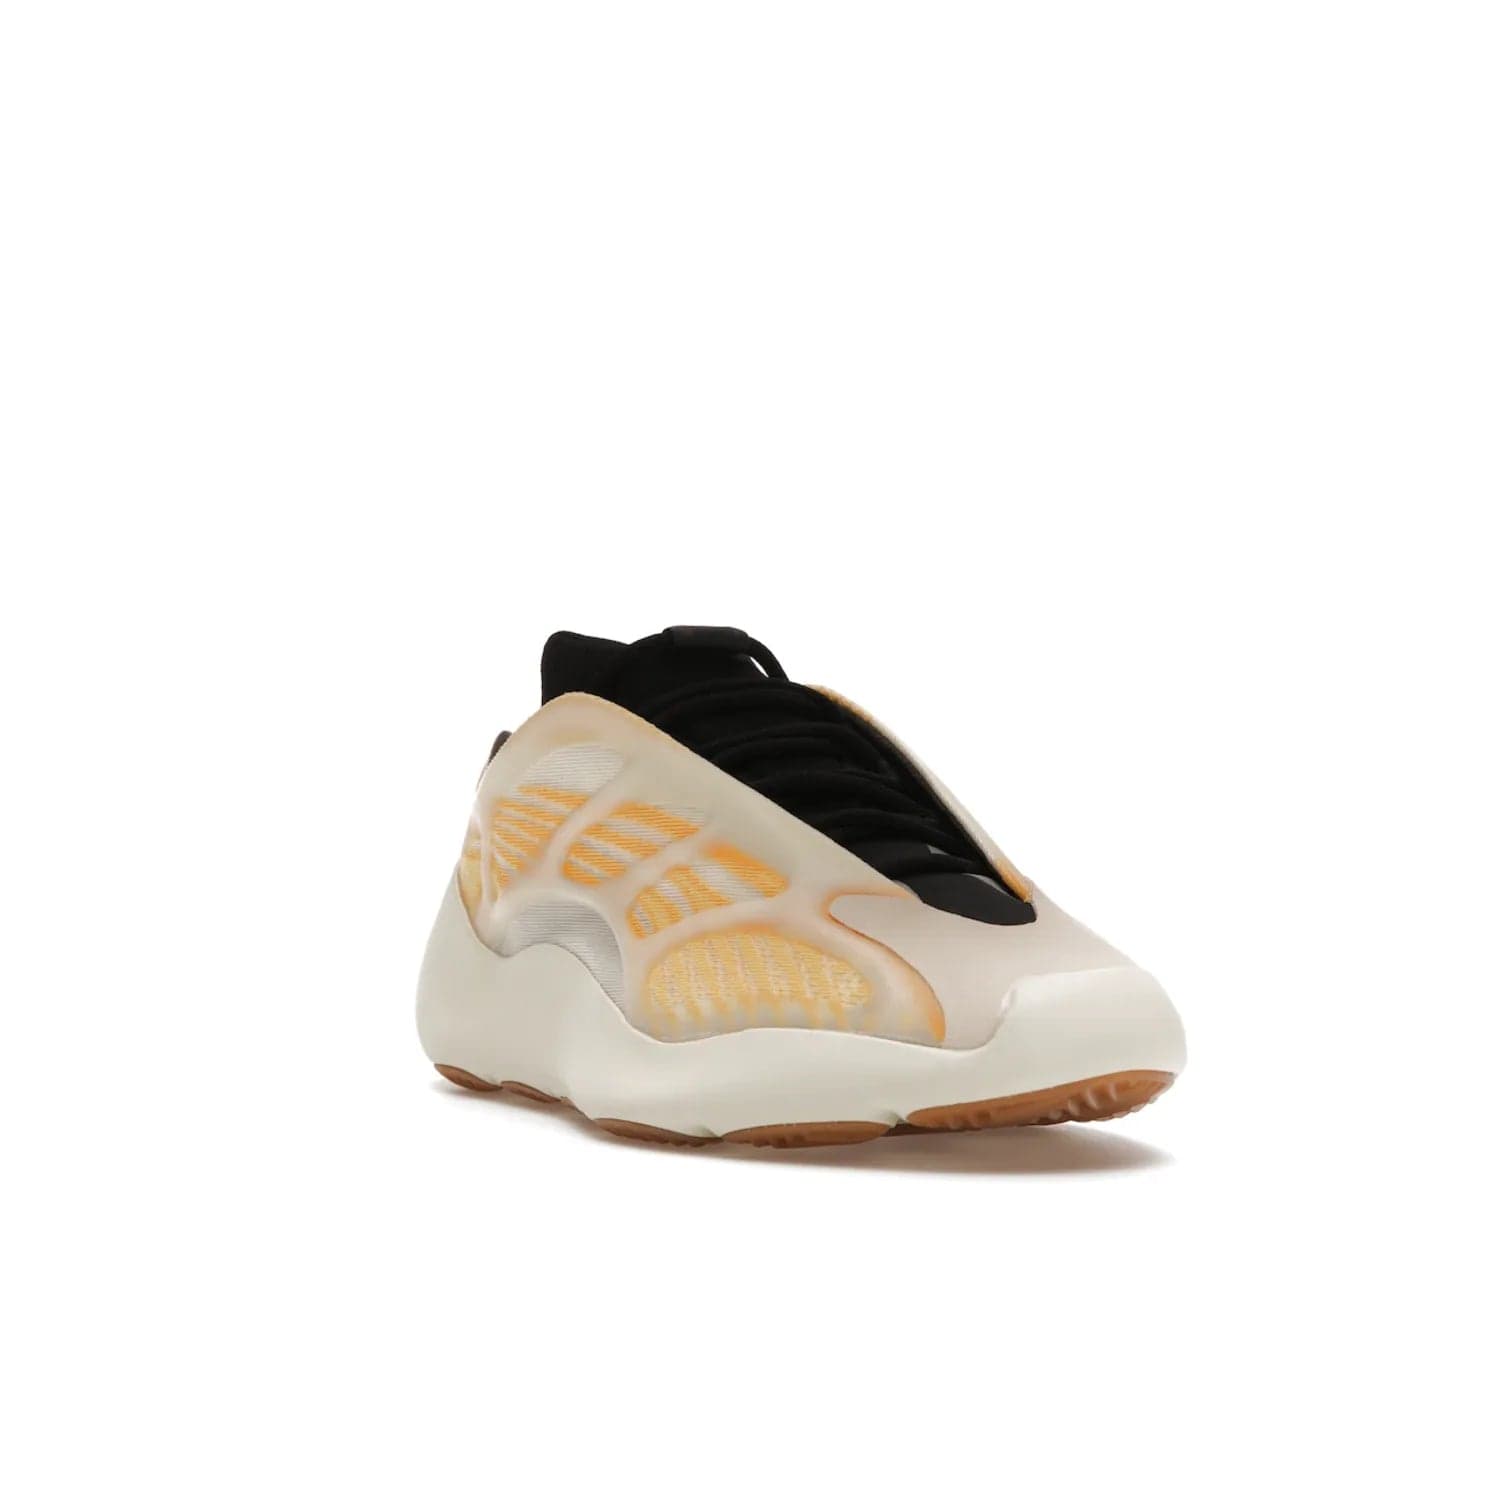 adidas Yeezy 700 V3 Mono Safflower - Image 7 - Only at www.BallersClubKickz.com - Fresh Yeezy 700 V3 Mono Safflower with a Primeknit upper, EVA foam sole, glow-in-the-dark lace caging, and cream-colored TPU accents. Released March 2021. Essential sneaker for any fashion enthusiast.